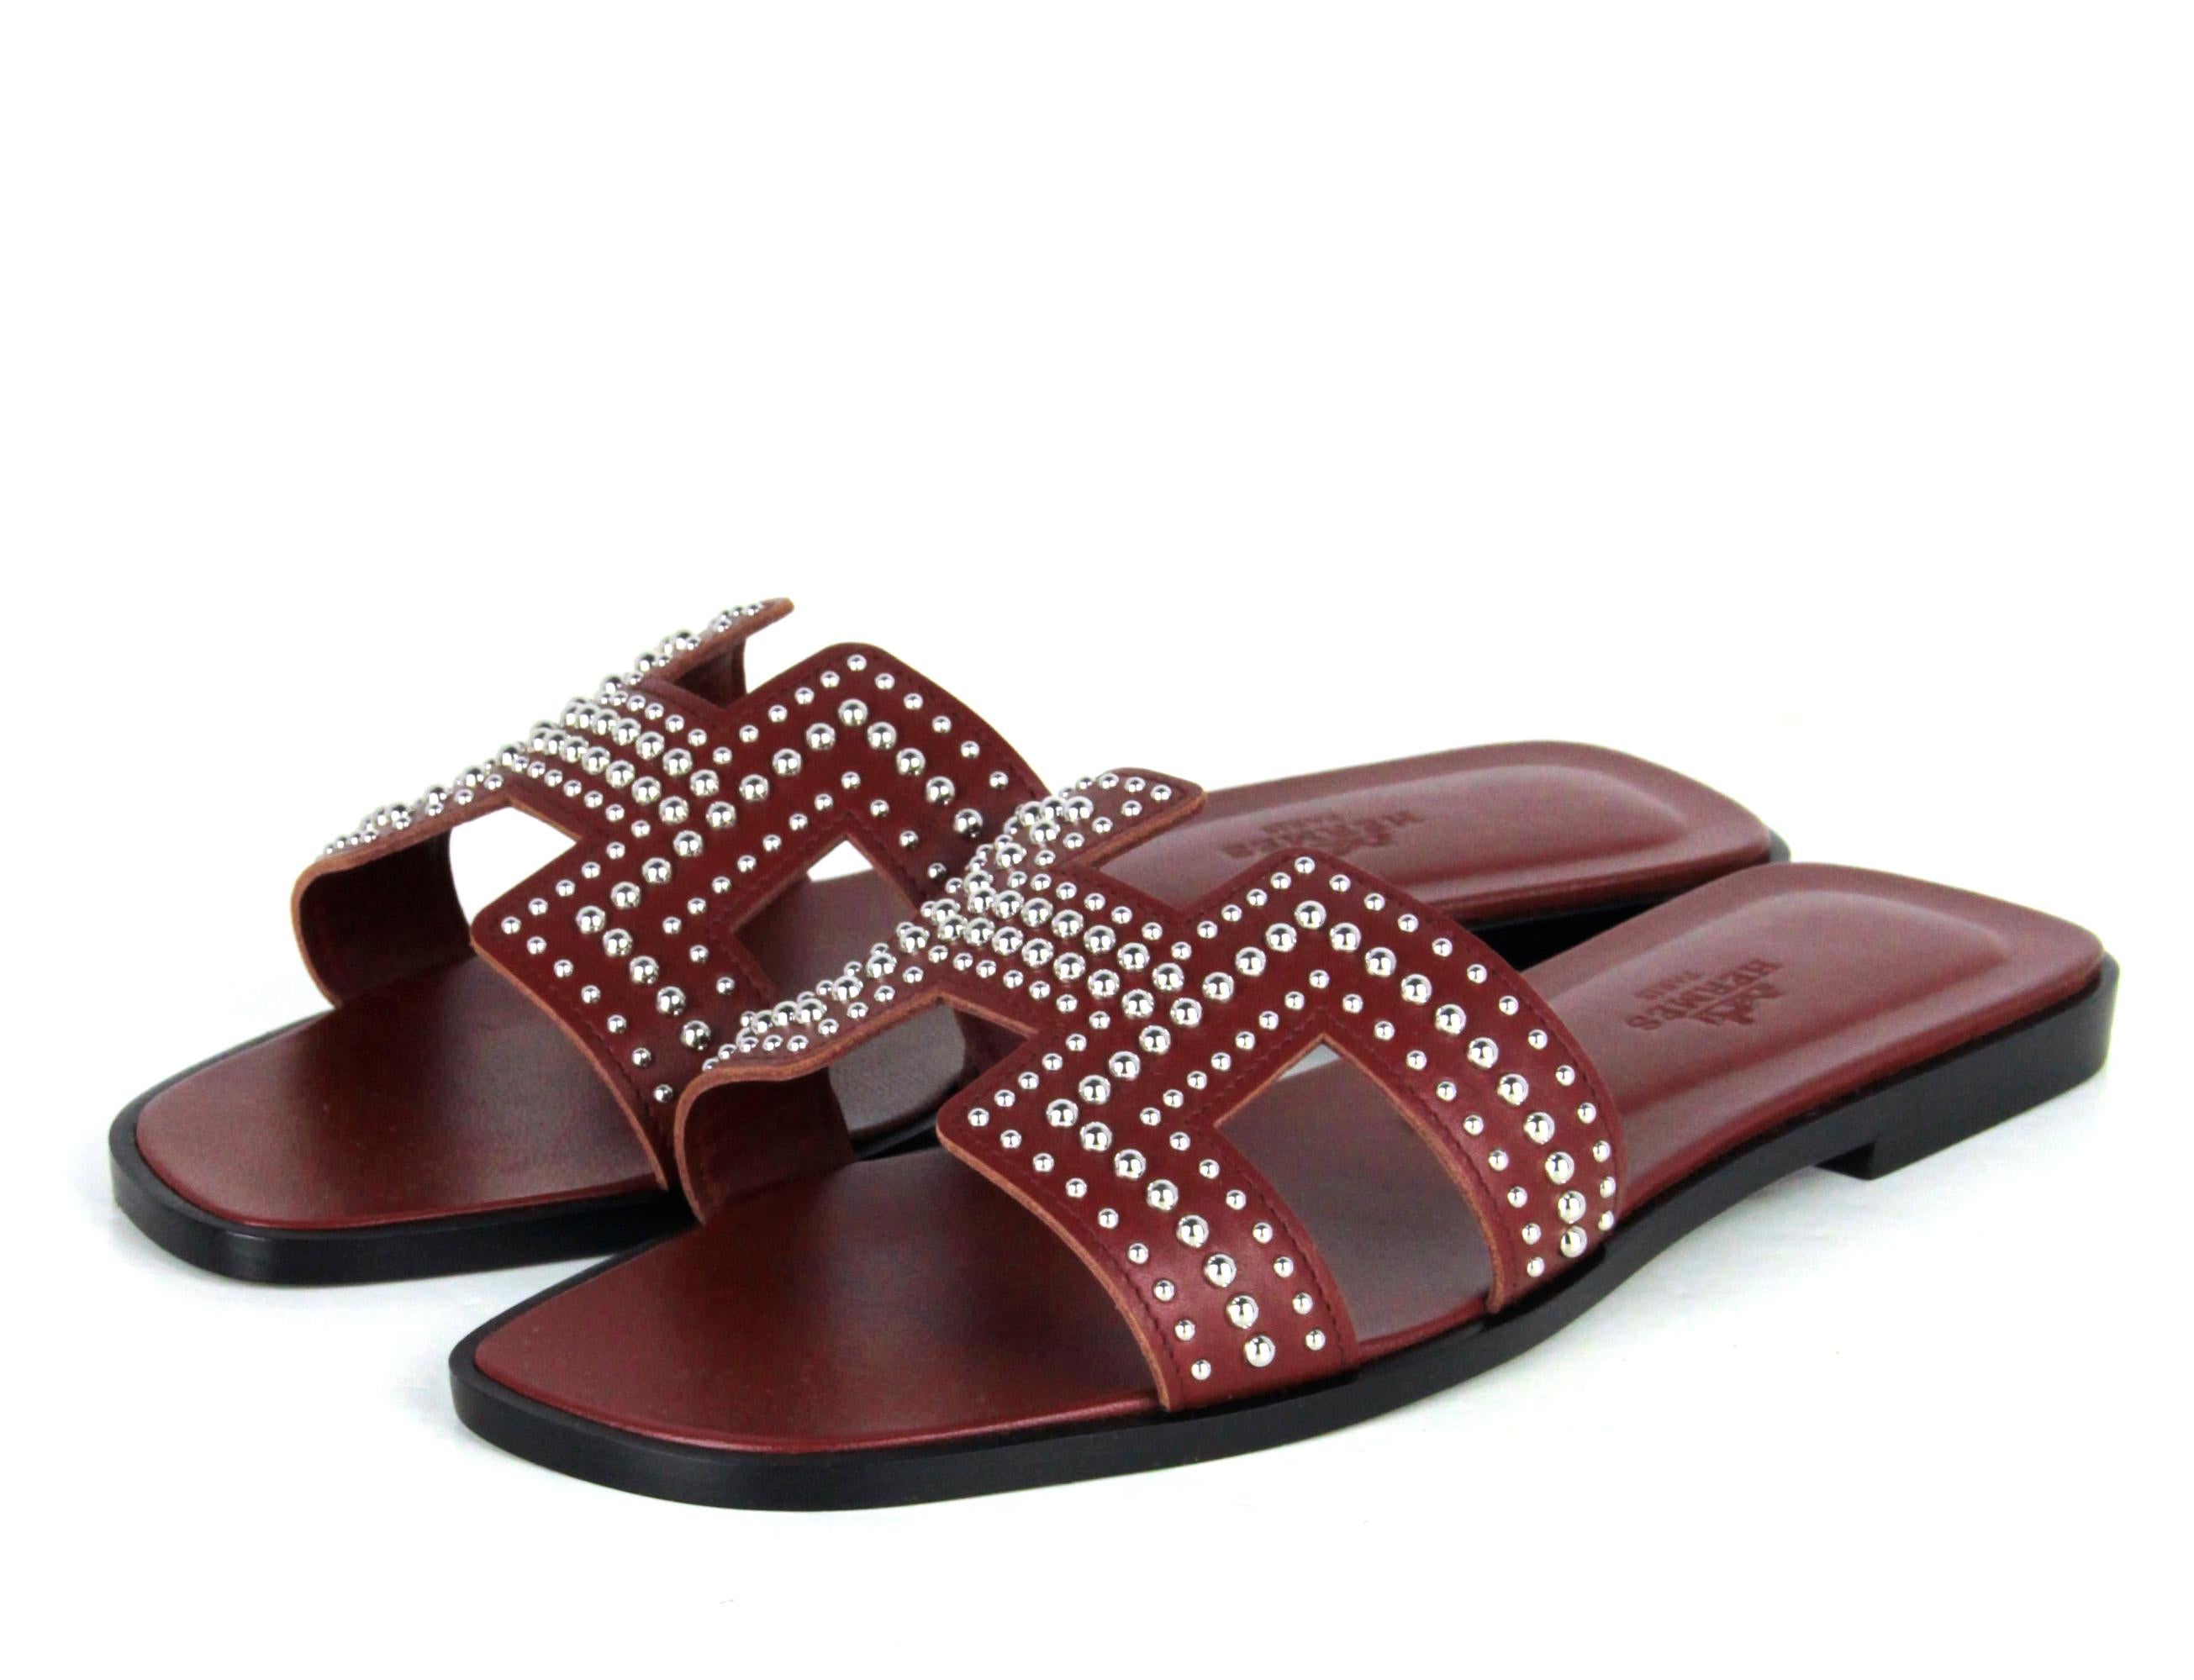 Hermes Rouge Tomette Oran Studs Slide Sandals sz 37.5

Made In: Italy
Year of Production: 2021
Color: Rouge tomette burgundy
Materials: Leather and metal
Closure/Opening: Slip-on
Overall Condition: New
Estimated Retail: Hermes box and two